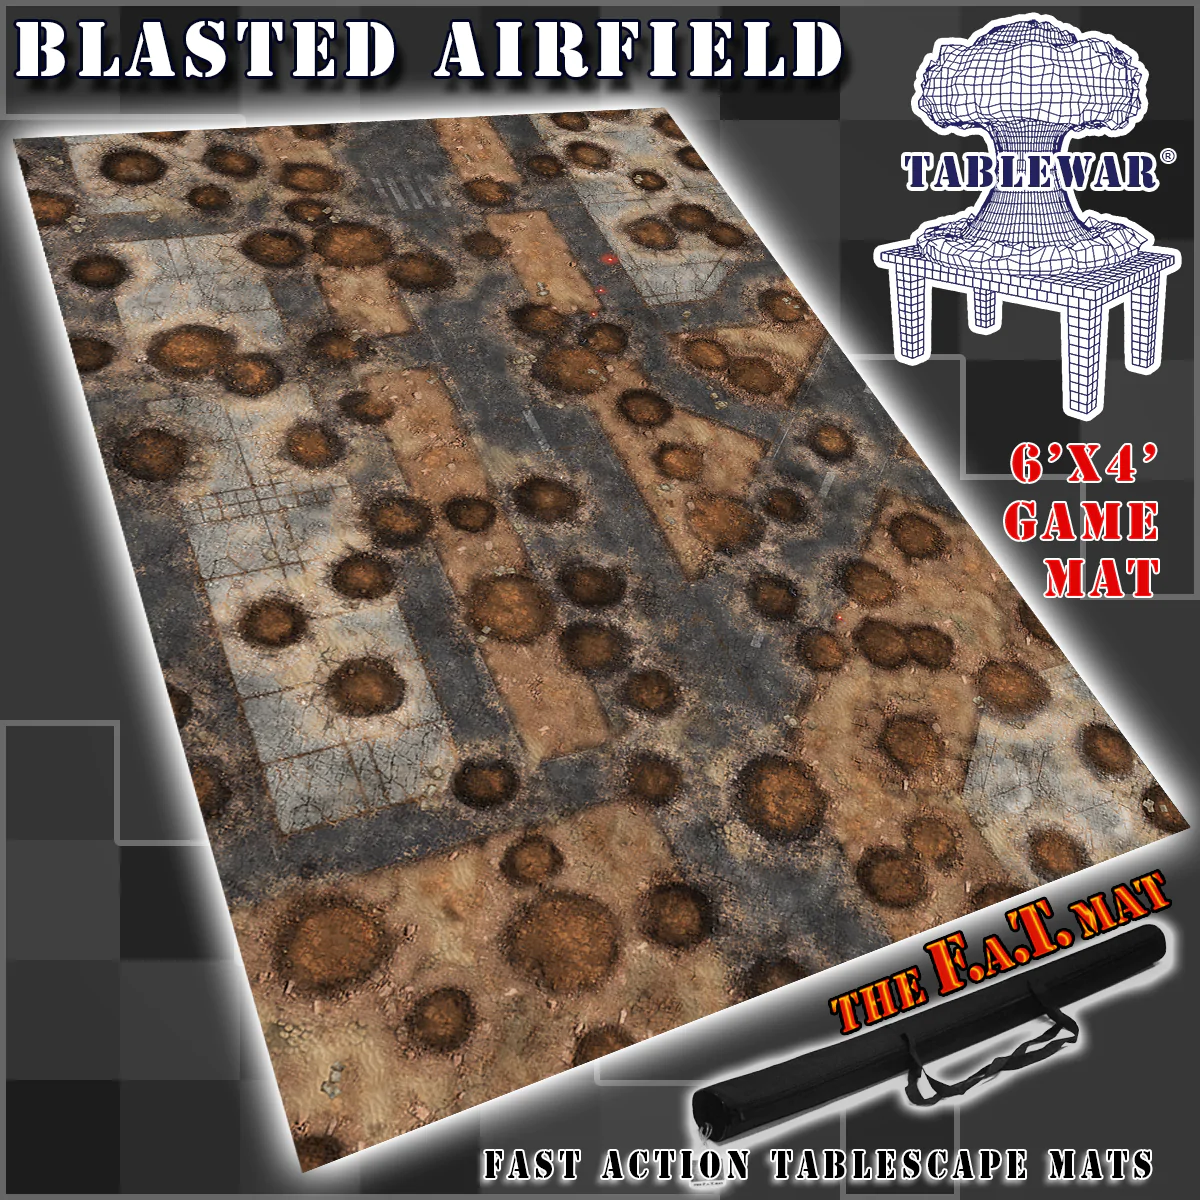 F.A.T. Mats: BLASTED AIRFIELD 6X4 